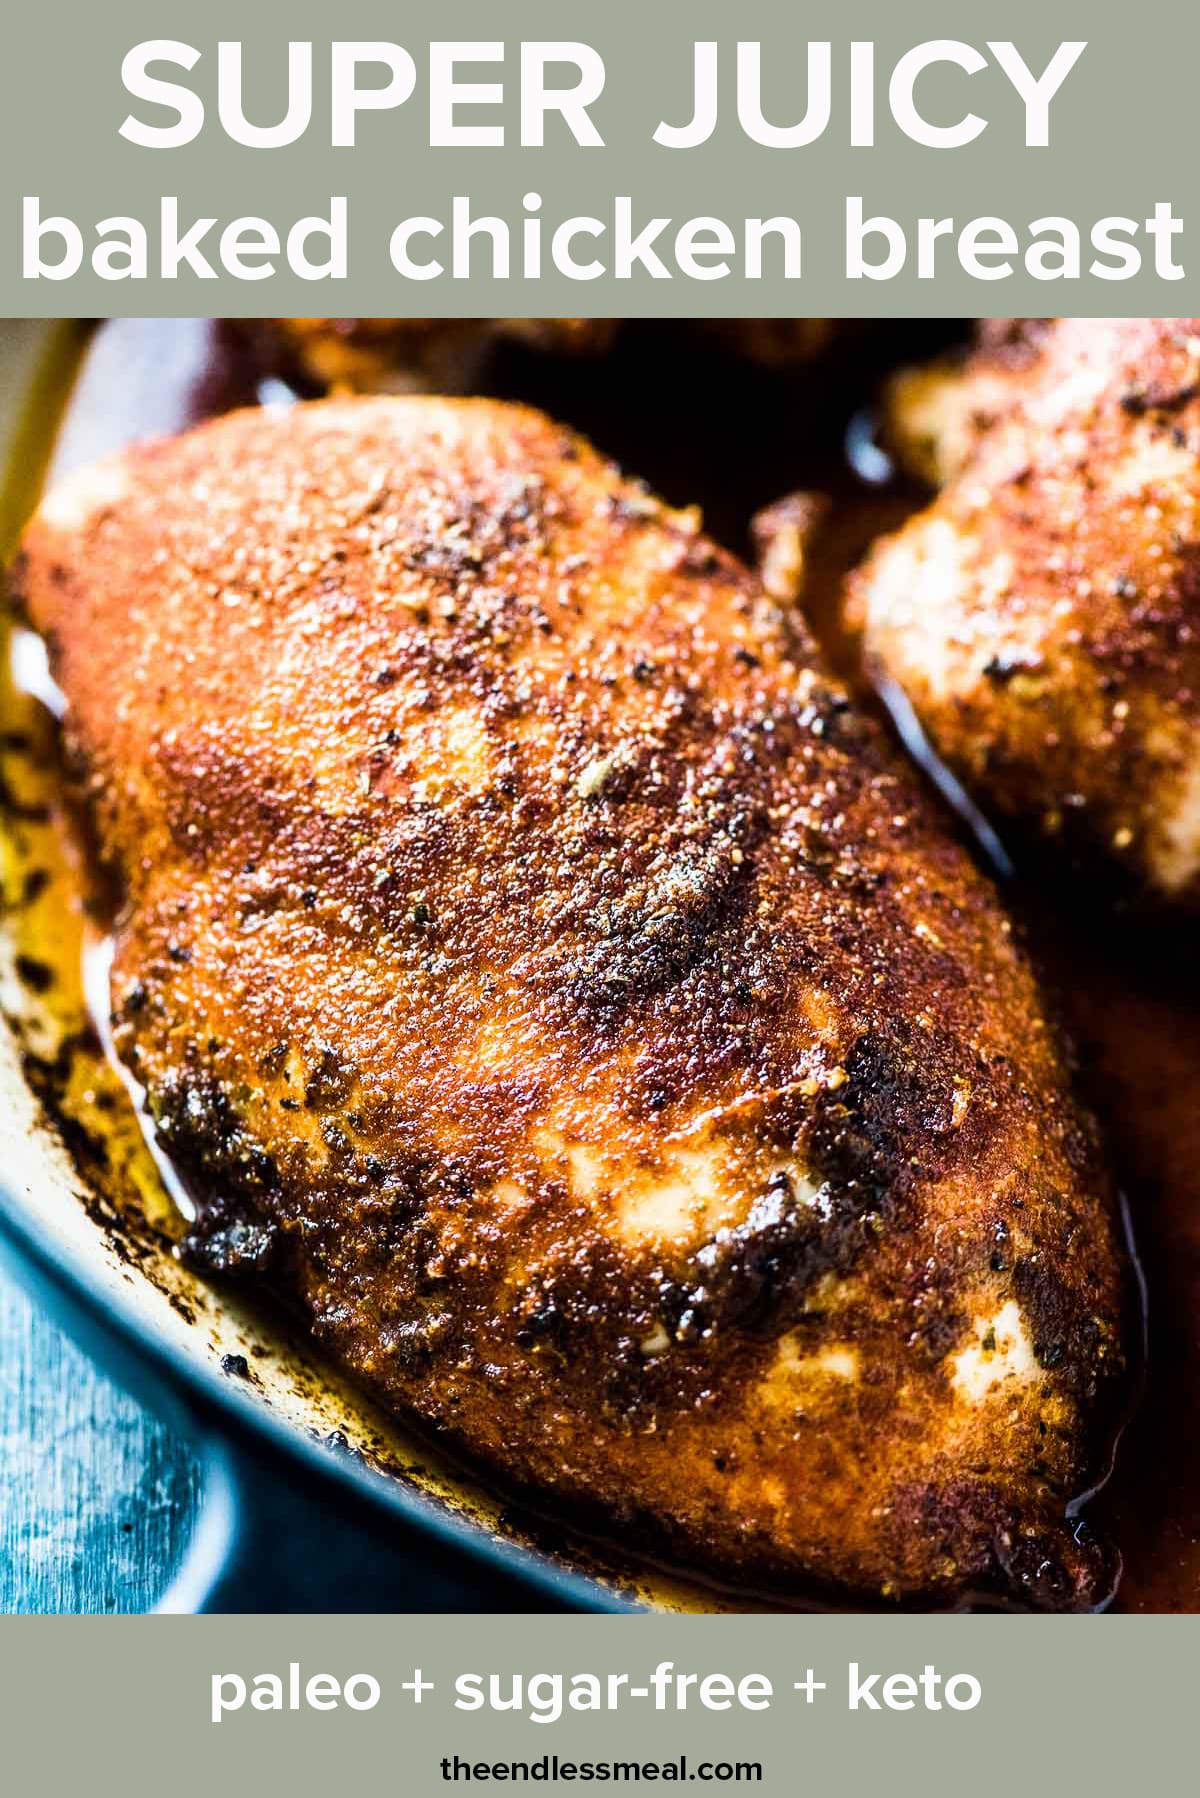 Juicy chicken breast with recipe title at the top of the image.